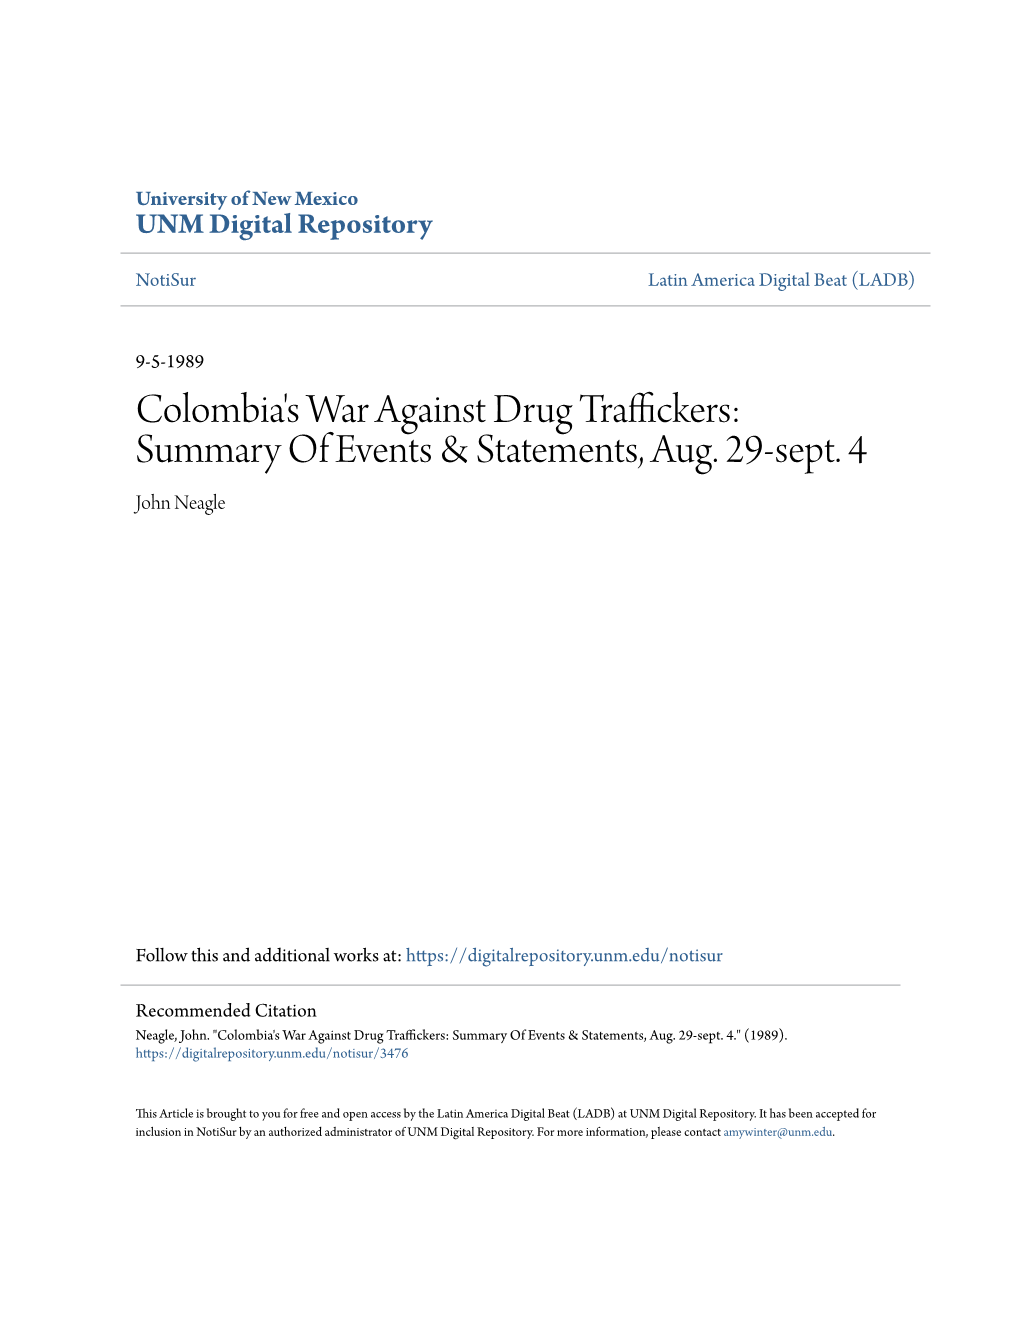 Colombia's War Against Drug Traffickers: Summary of Events & Statements, Aug